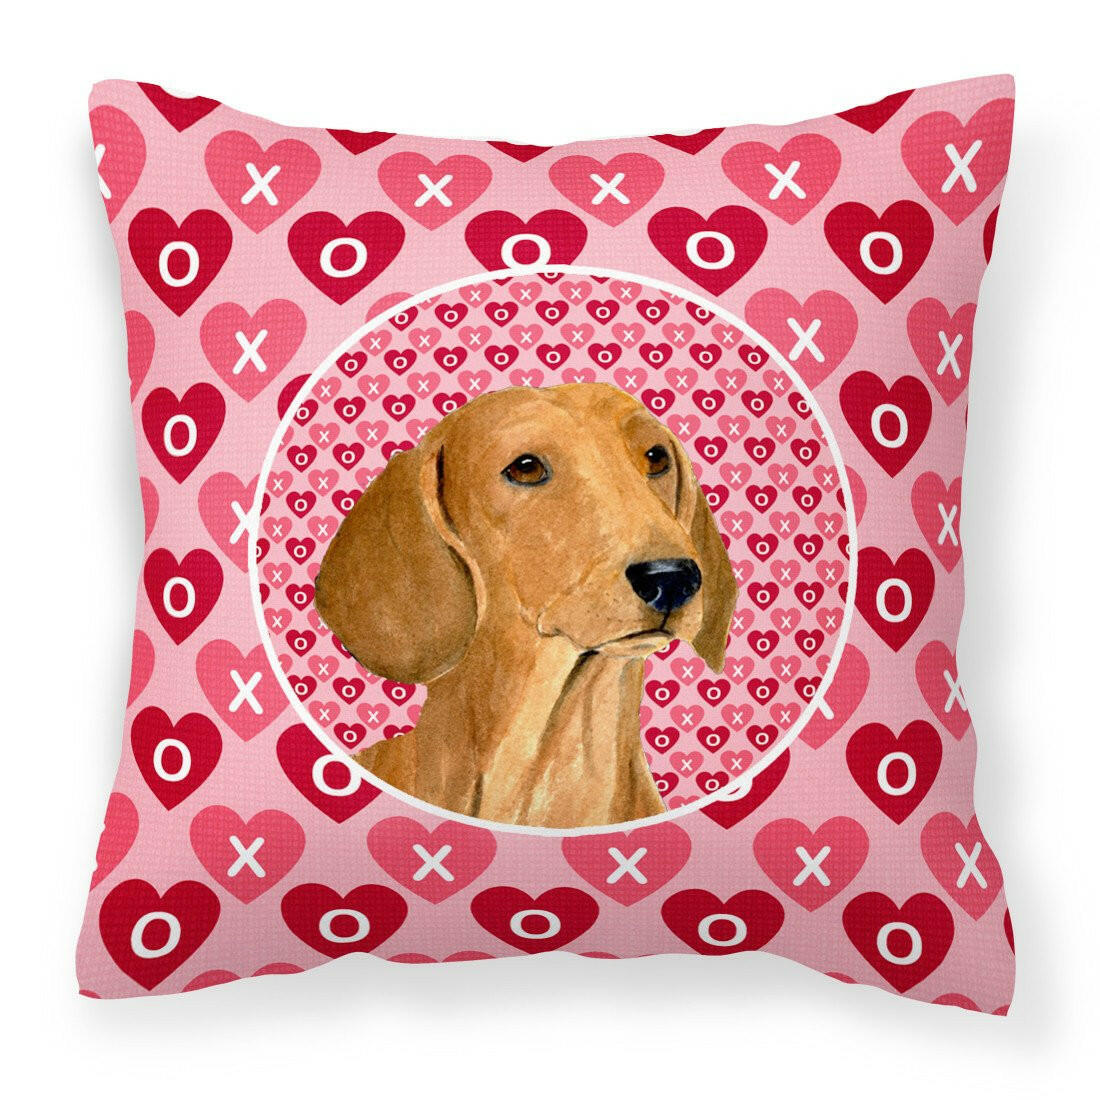 Dachshund Hearts Love and Valentine's Day Portrait Fabric Decorative Pillow SS4487PW1414 by Caroline's Treasures